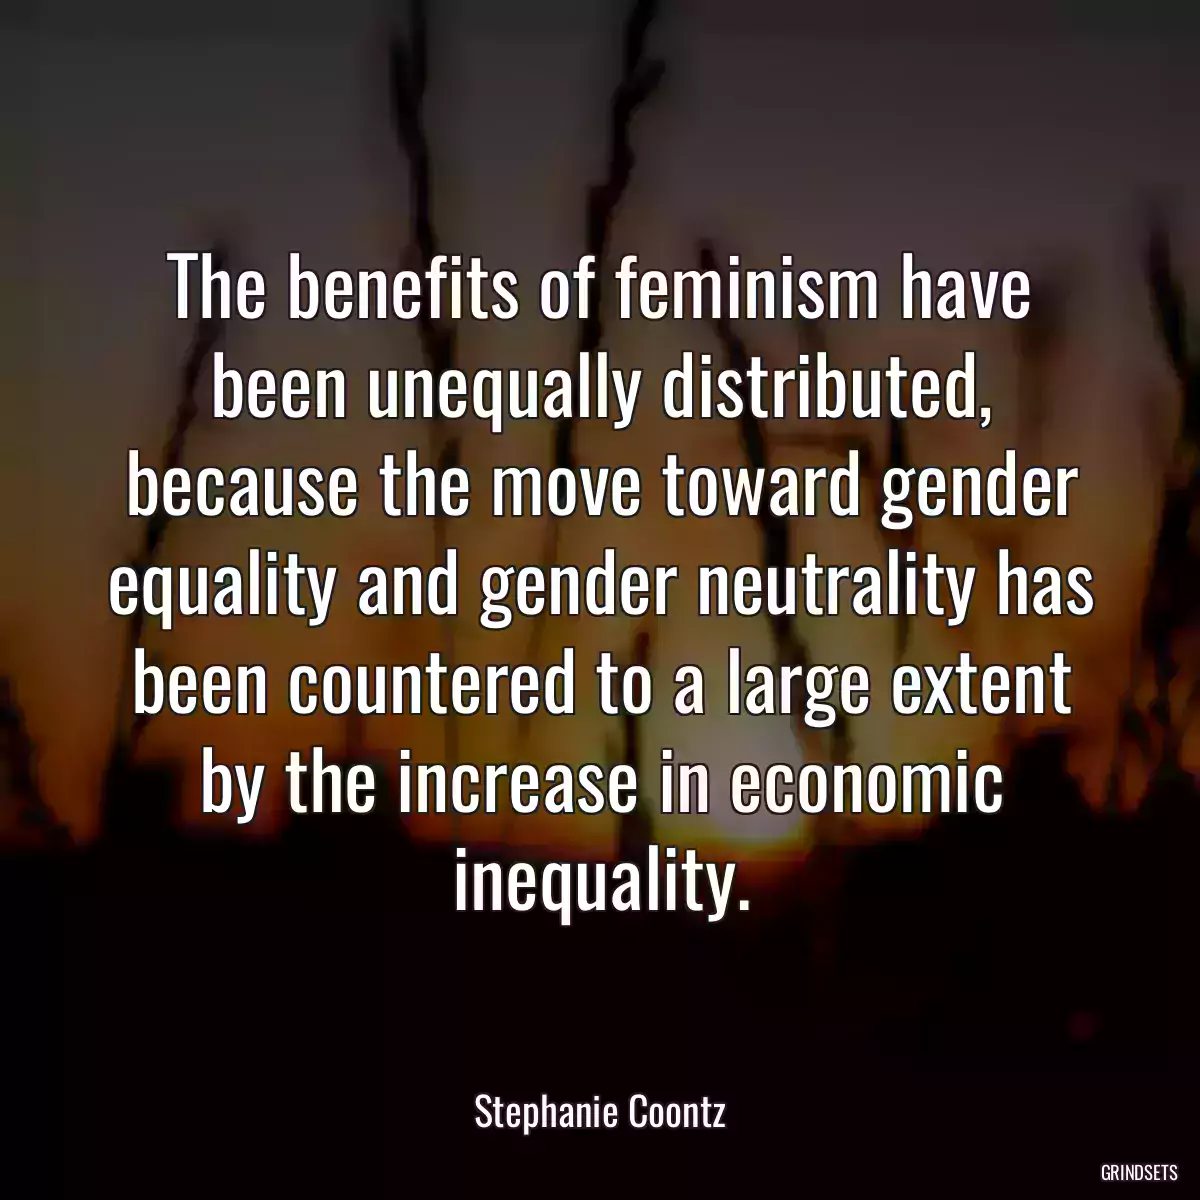 The benefits of feminism have been unequally distributed, because the move toward gender equality and gender neutrality has been countered to a large extent by the increase in economic inequality.